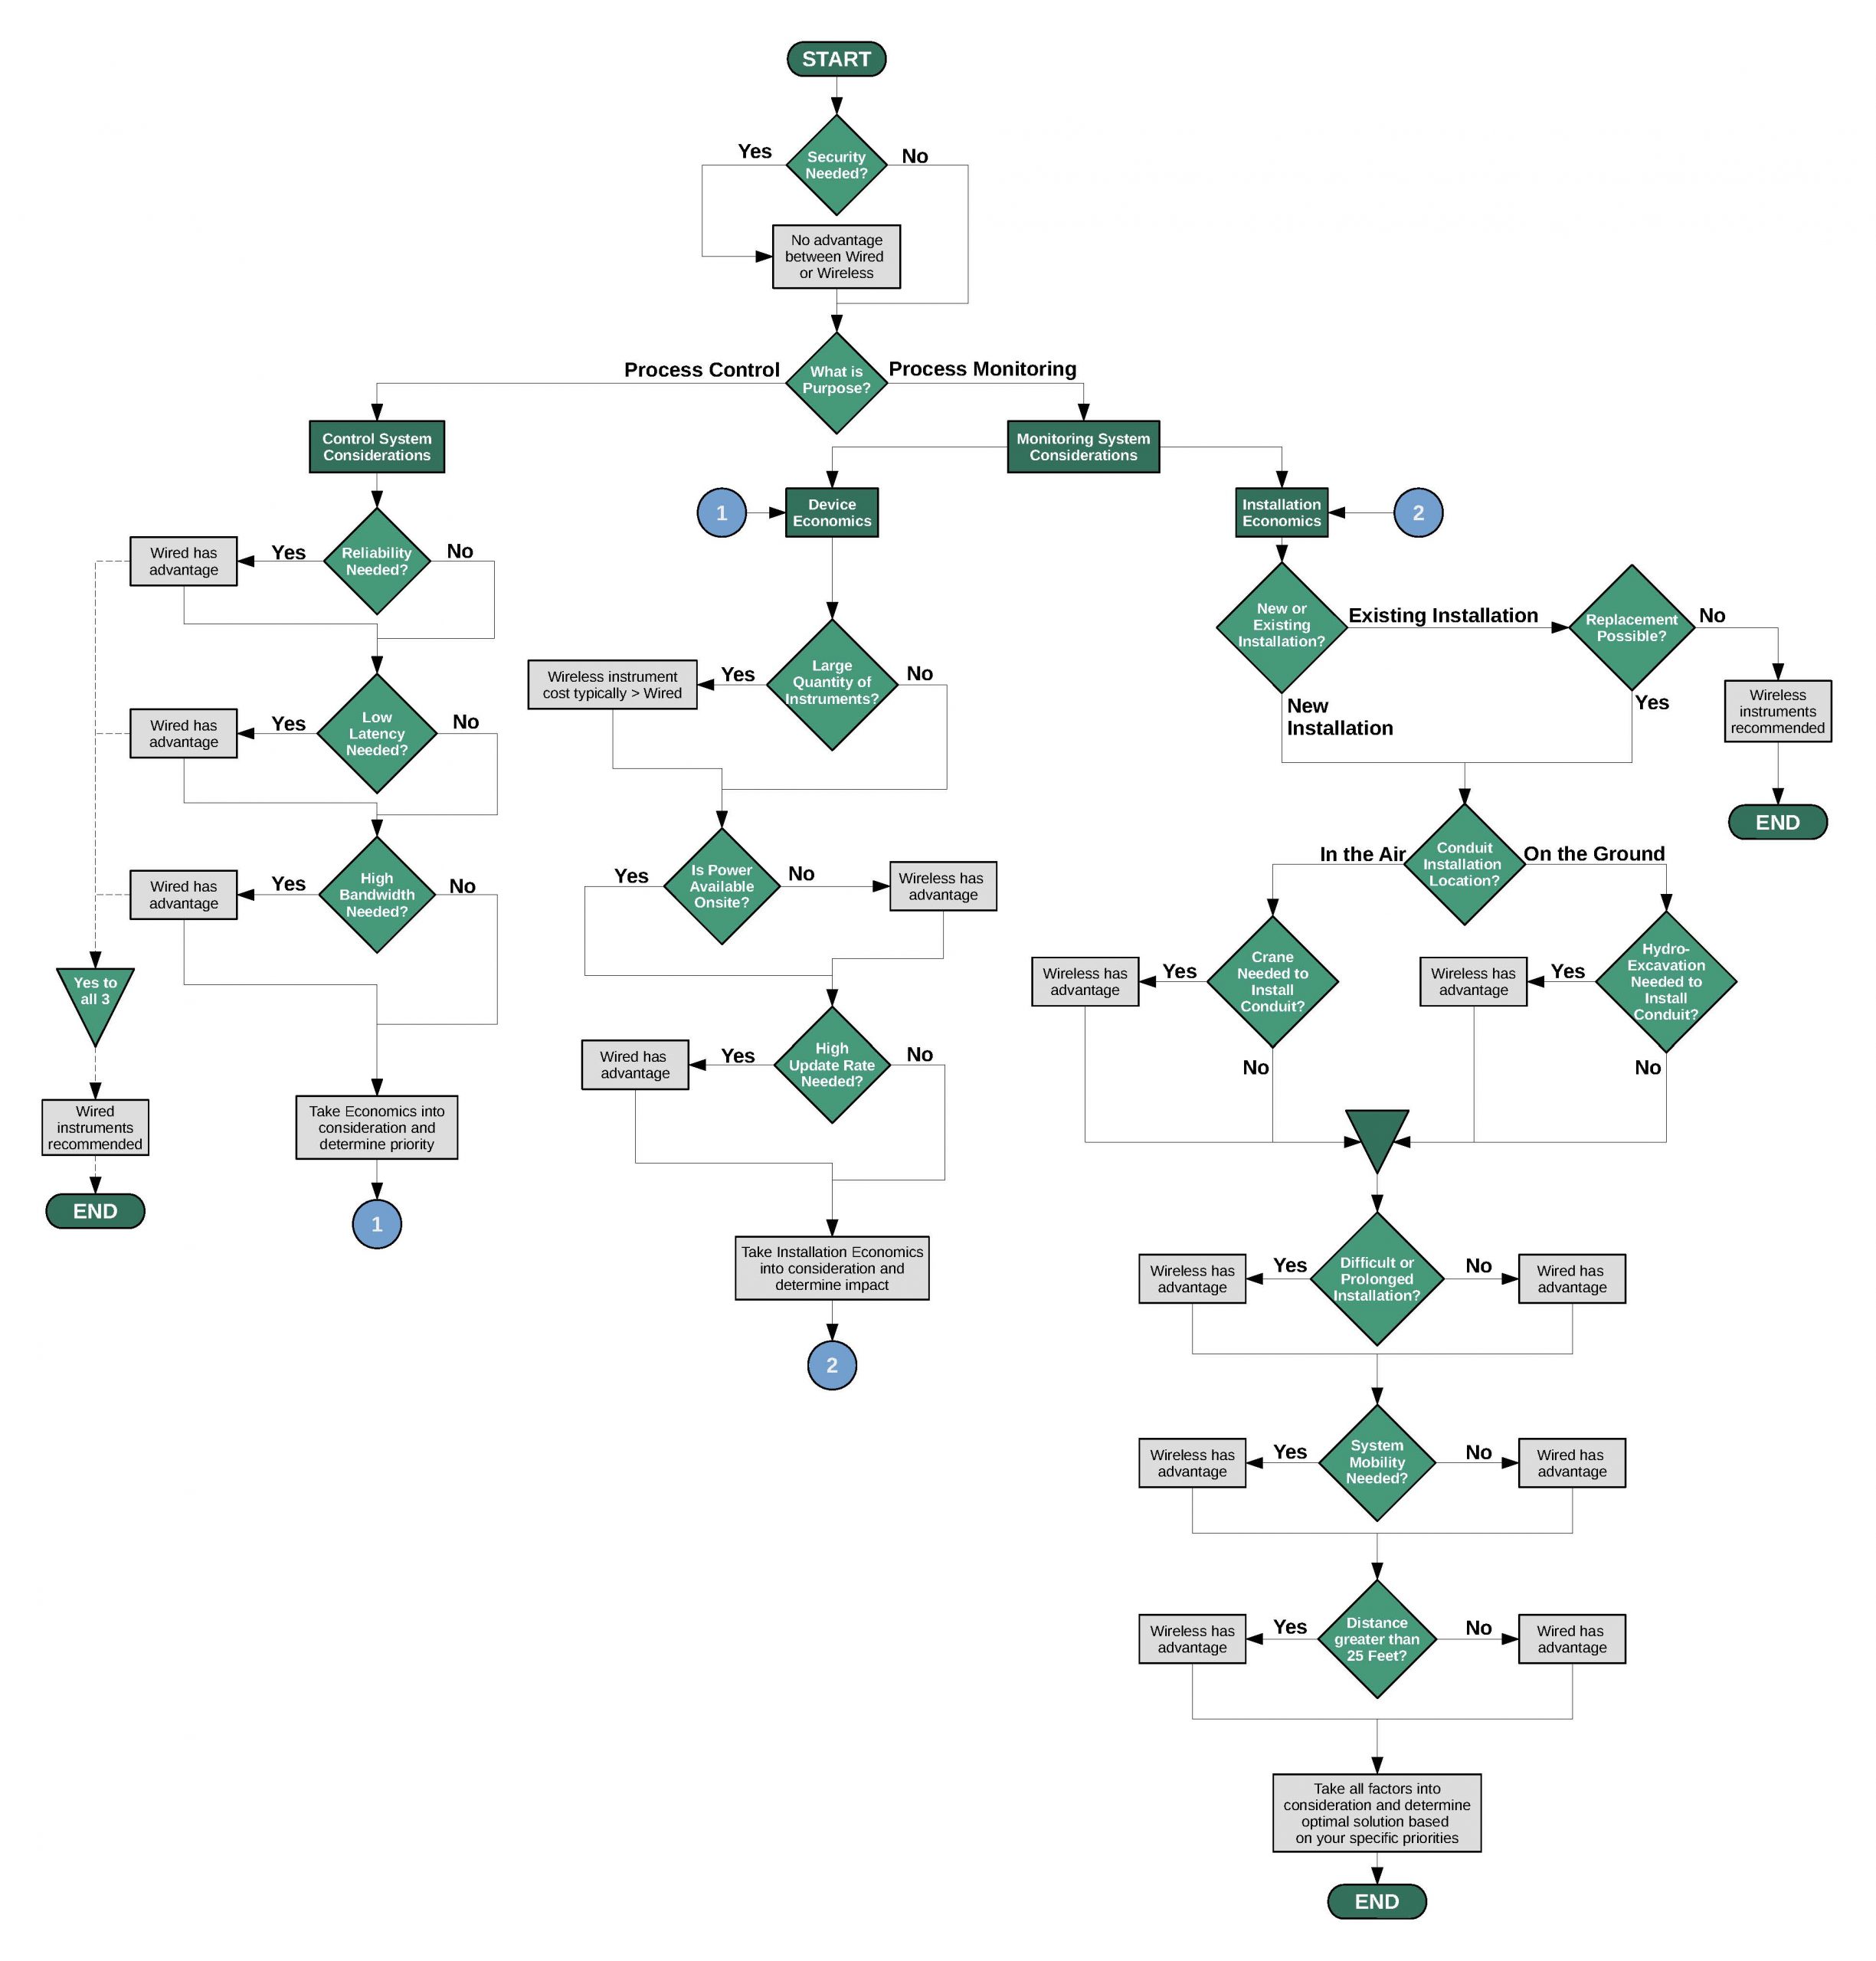 Picture of the complete Decision Tree/flow chart for choosing between wired or wireless, including 17 questions to ask yourself